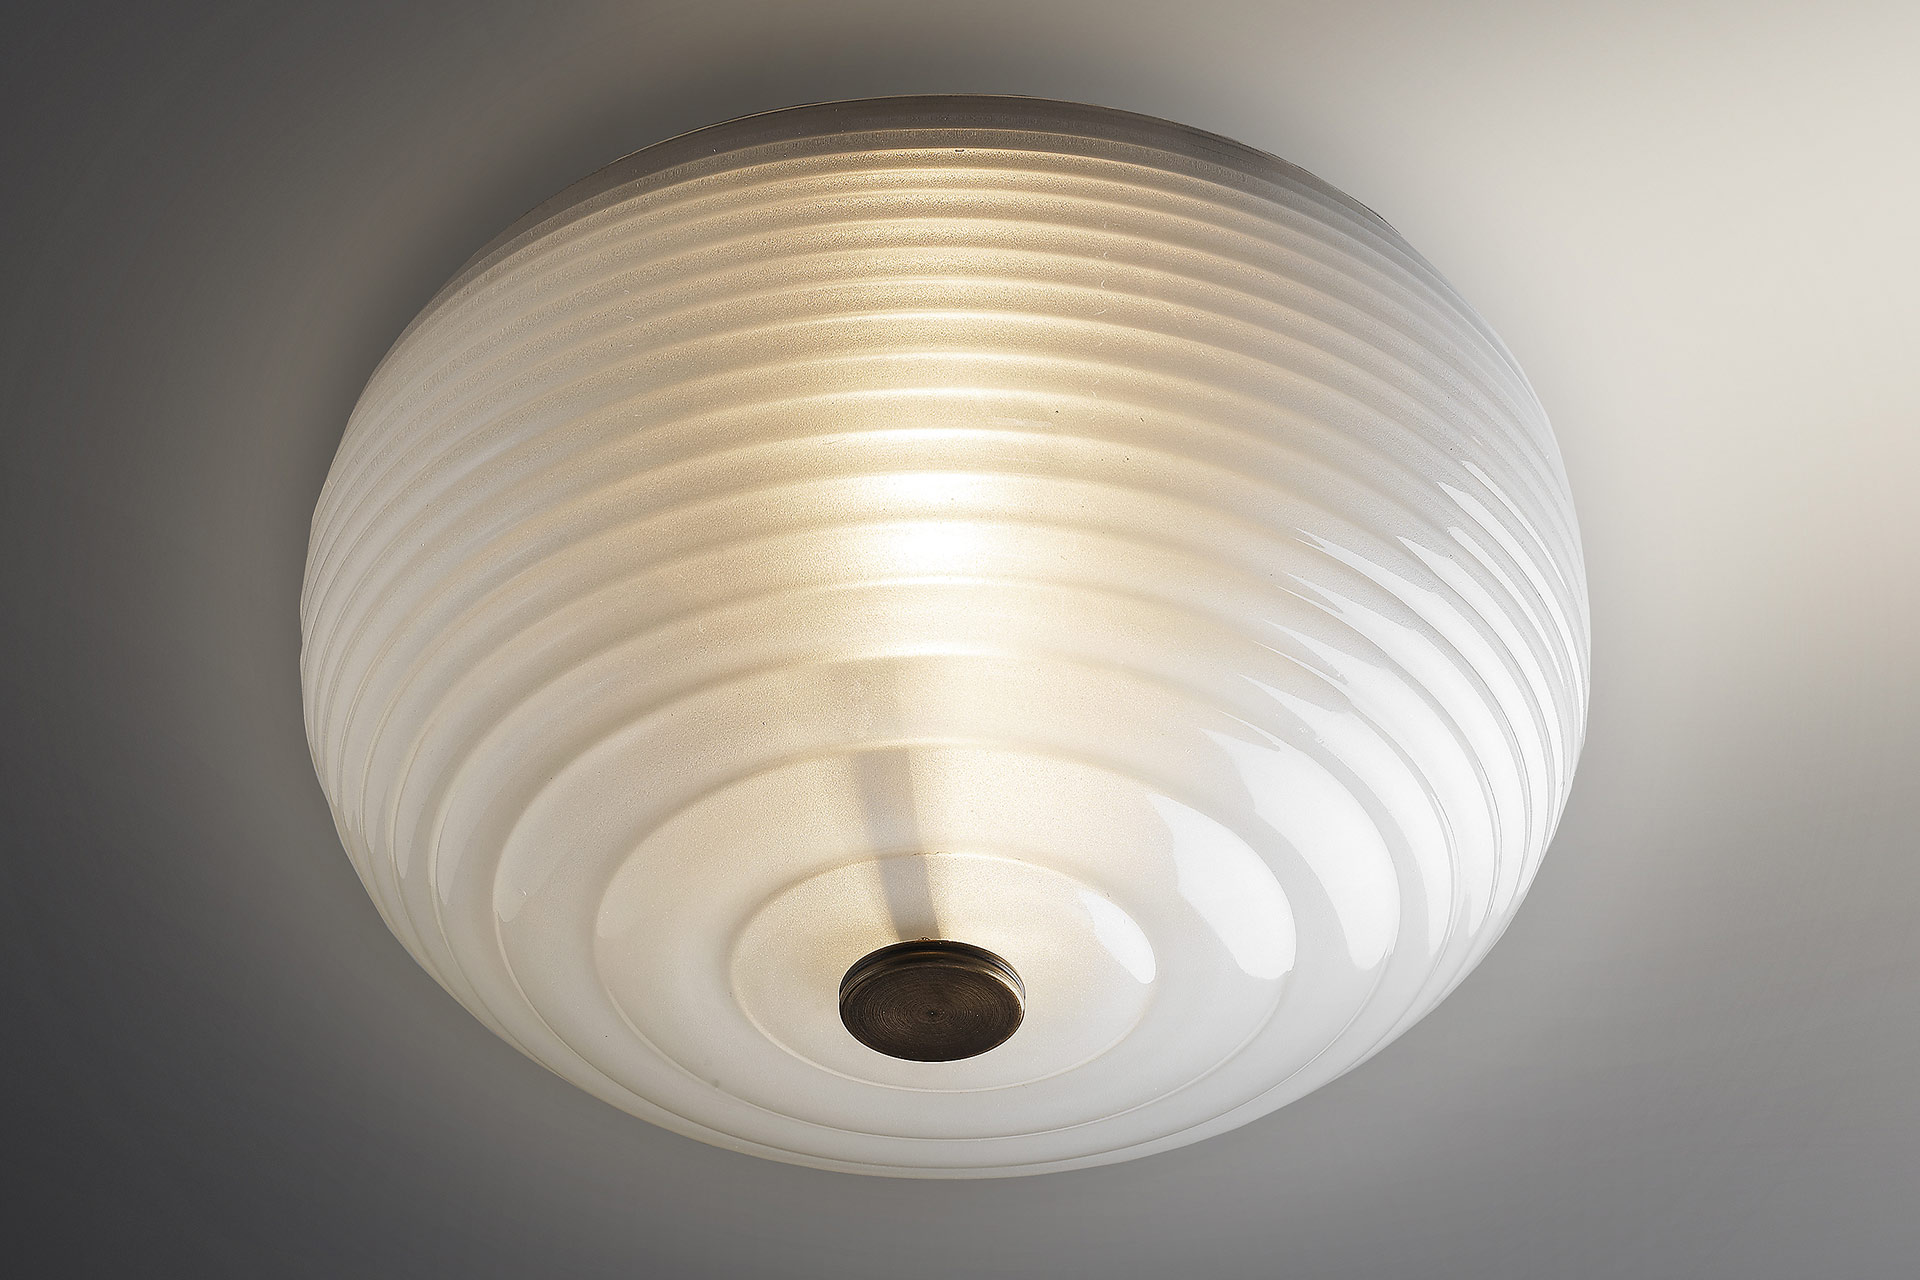 The Beehive Ceiling Light from Hector Finch